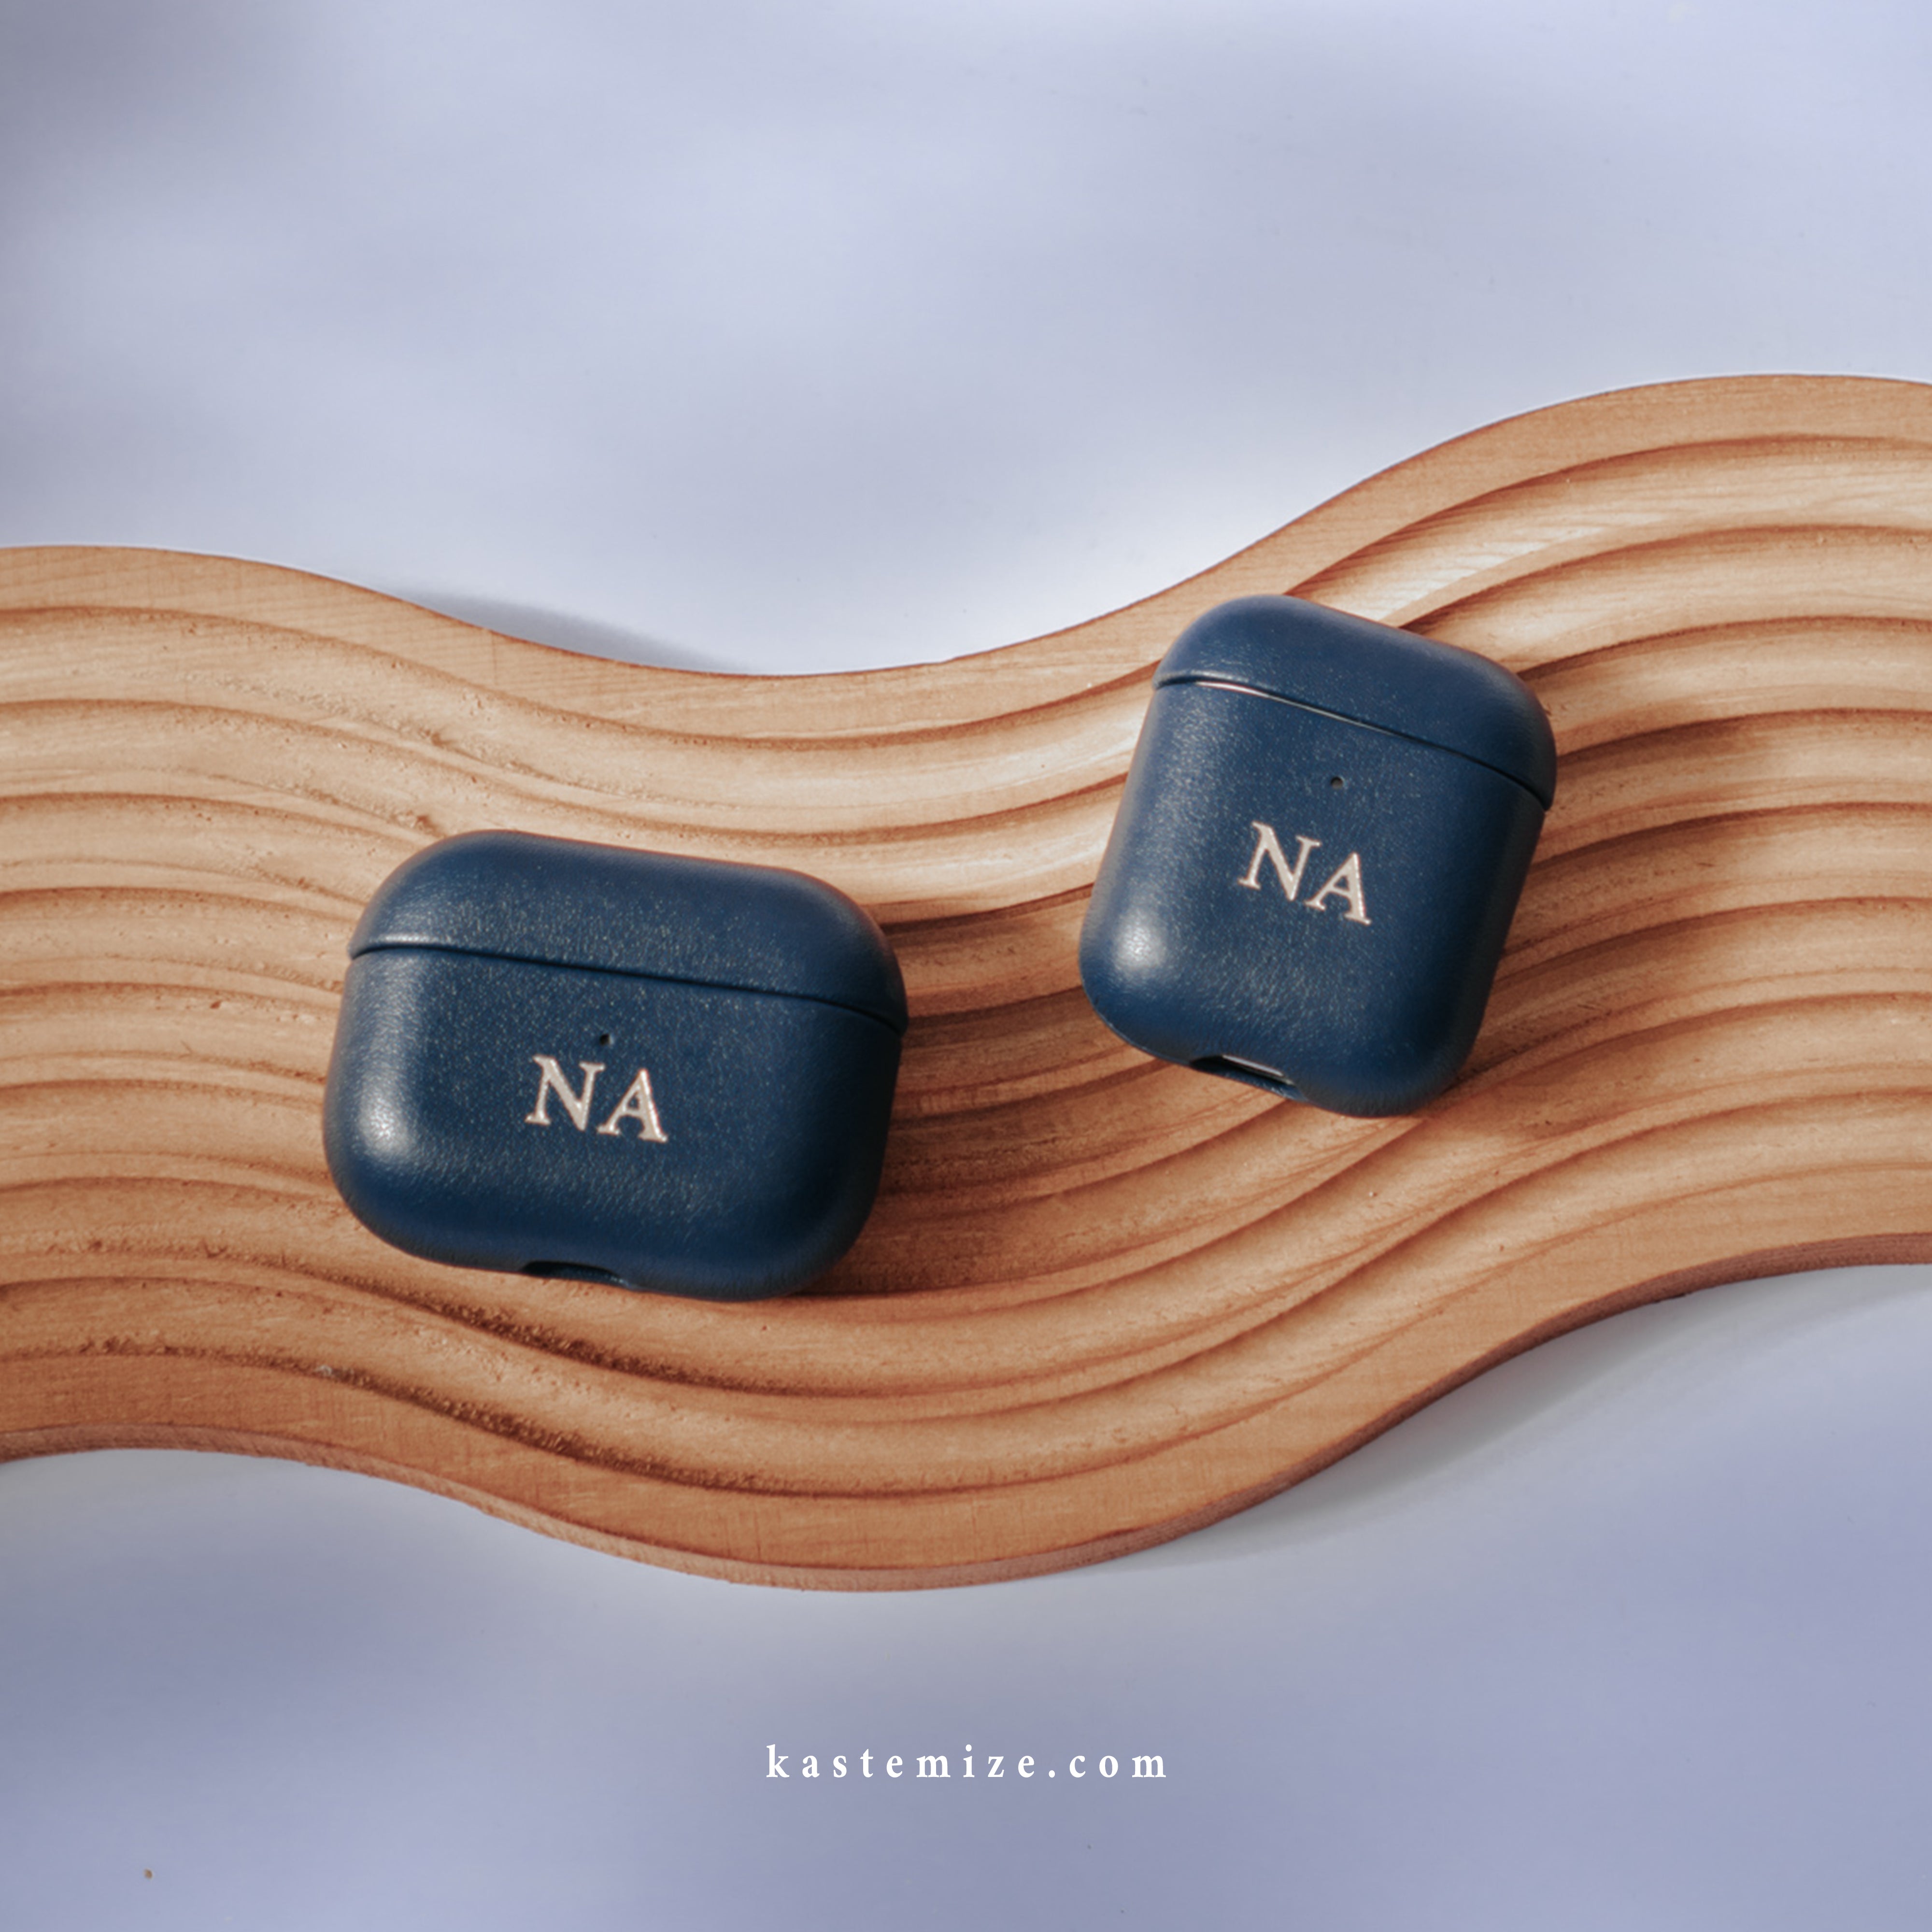 Personalised Midnight Navy Airpods Case in Singapore with name engraving and customisation